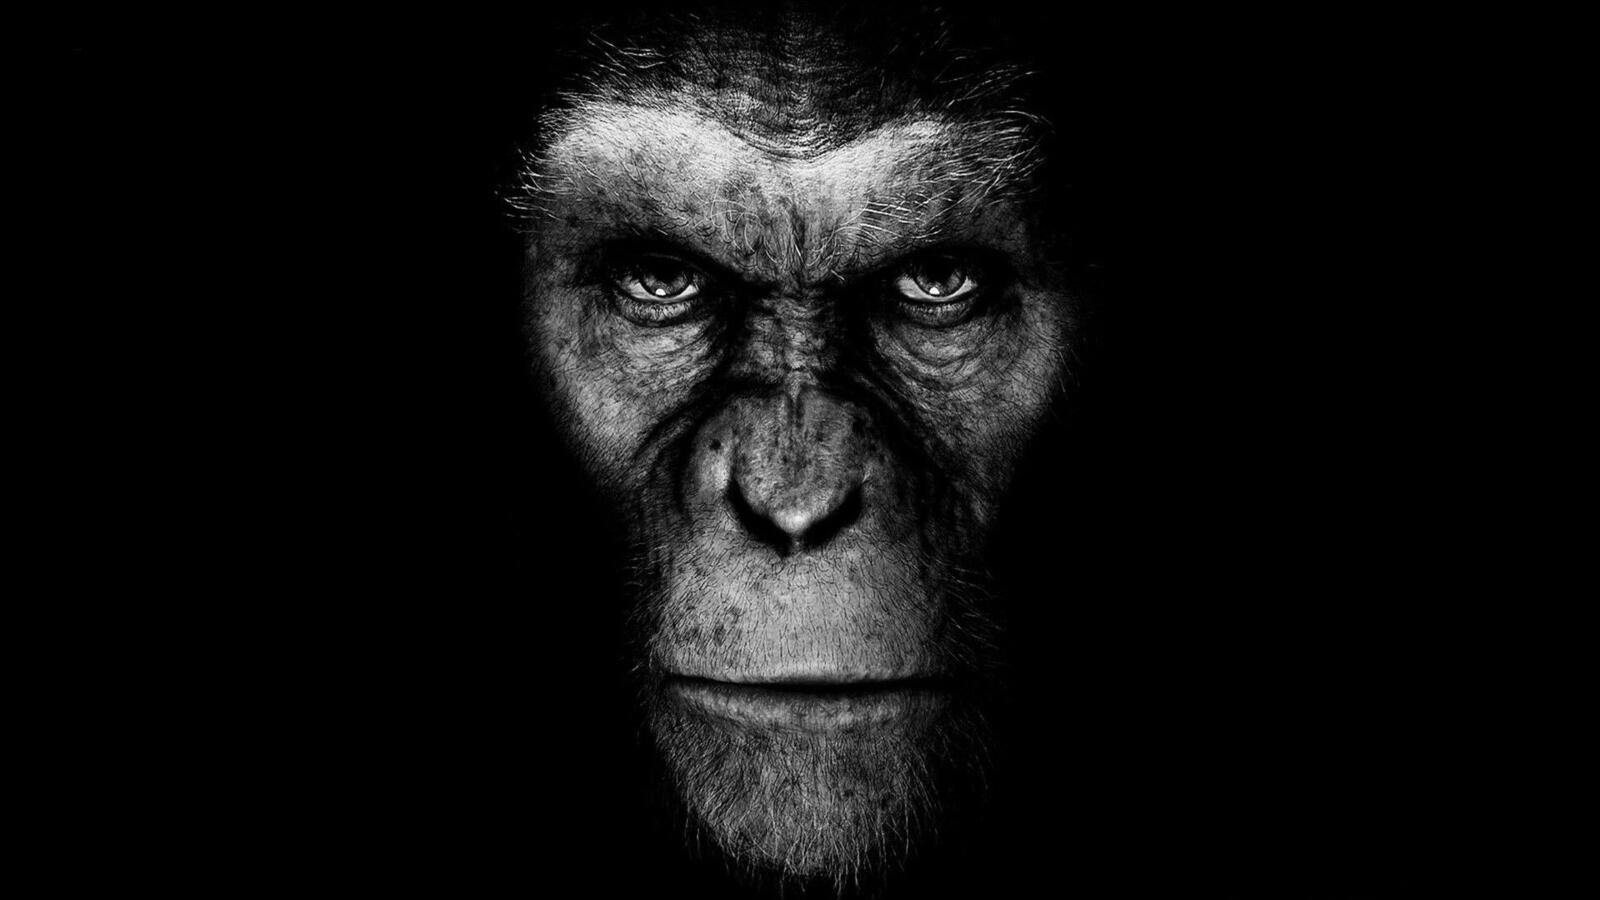 Wallpapers planet of the apes face movies on the desktop